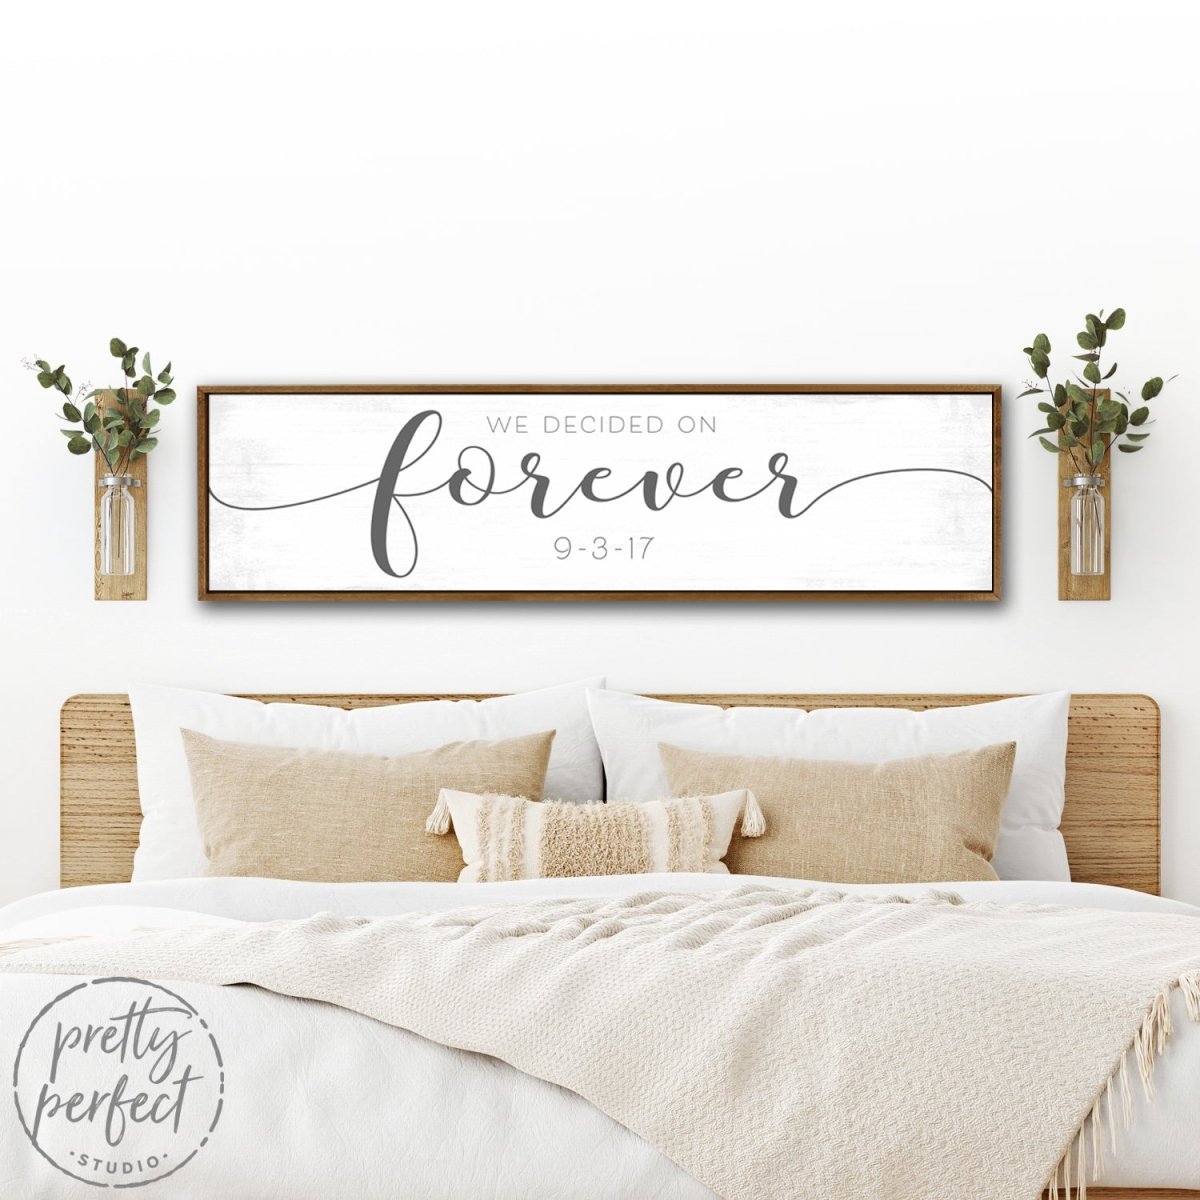 We Decided On Forever Wedding Date Sign Over Bed in Couples Bedroom - Pretty Perfect Studio